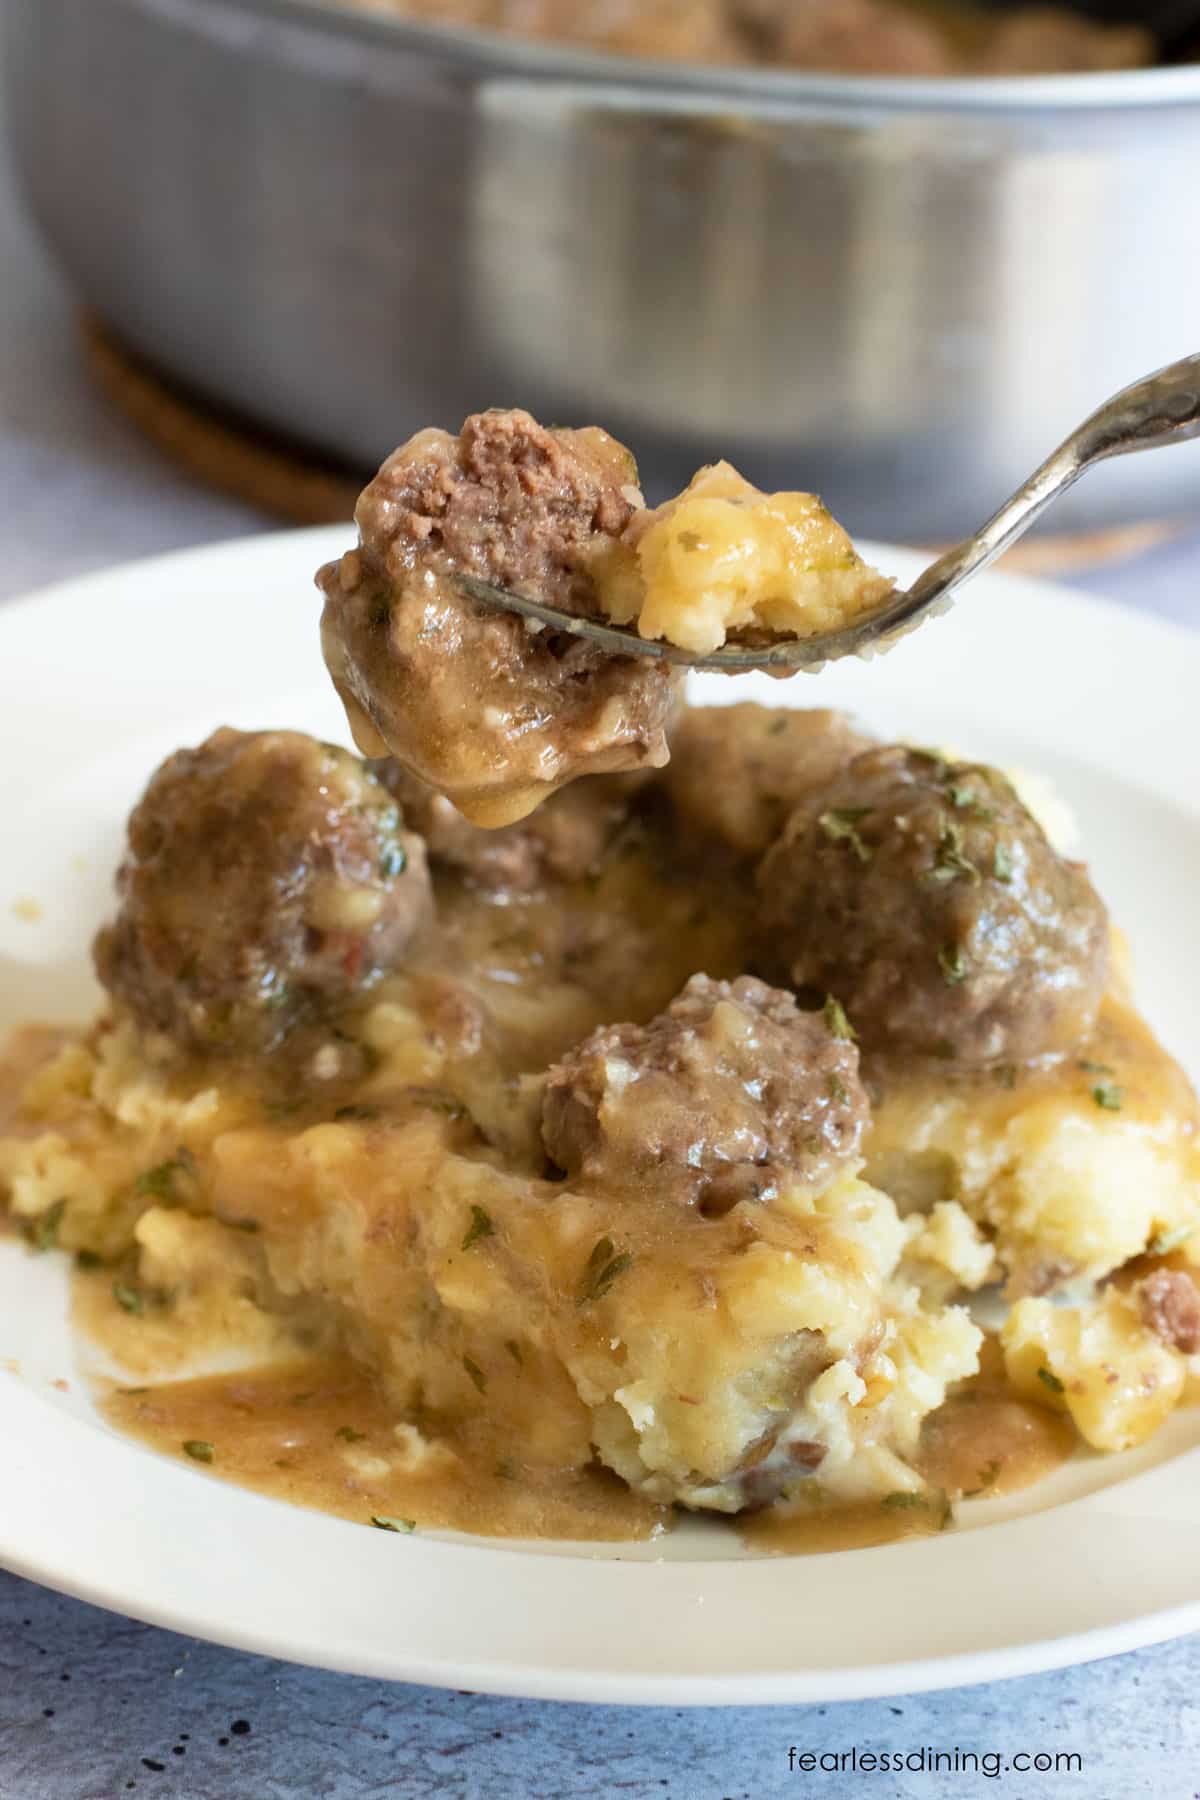 A fork holding up a Swedish meatball.